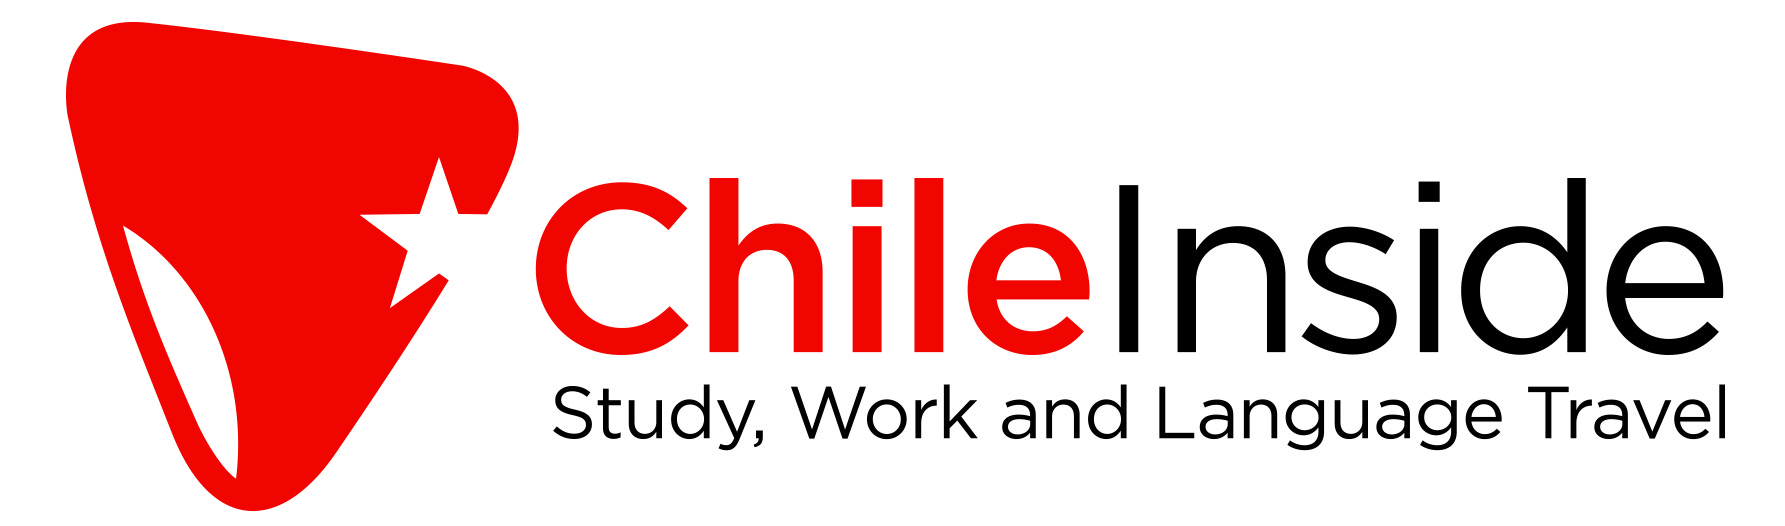 We are pleased to welcome our new Affiliate Member ChileInside